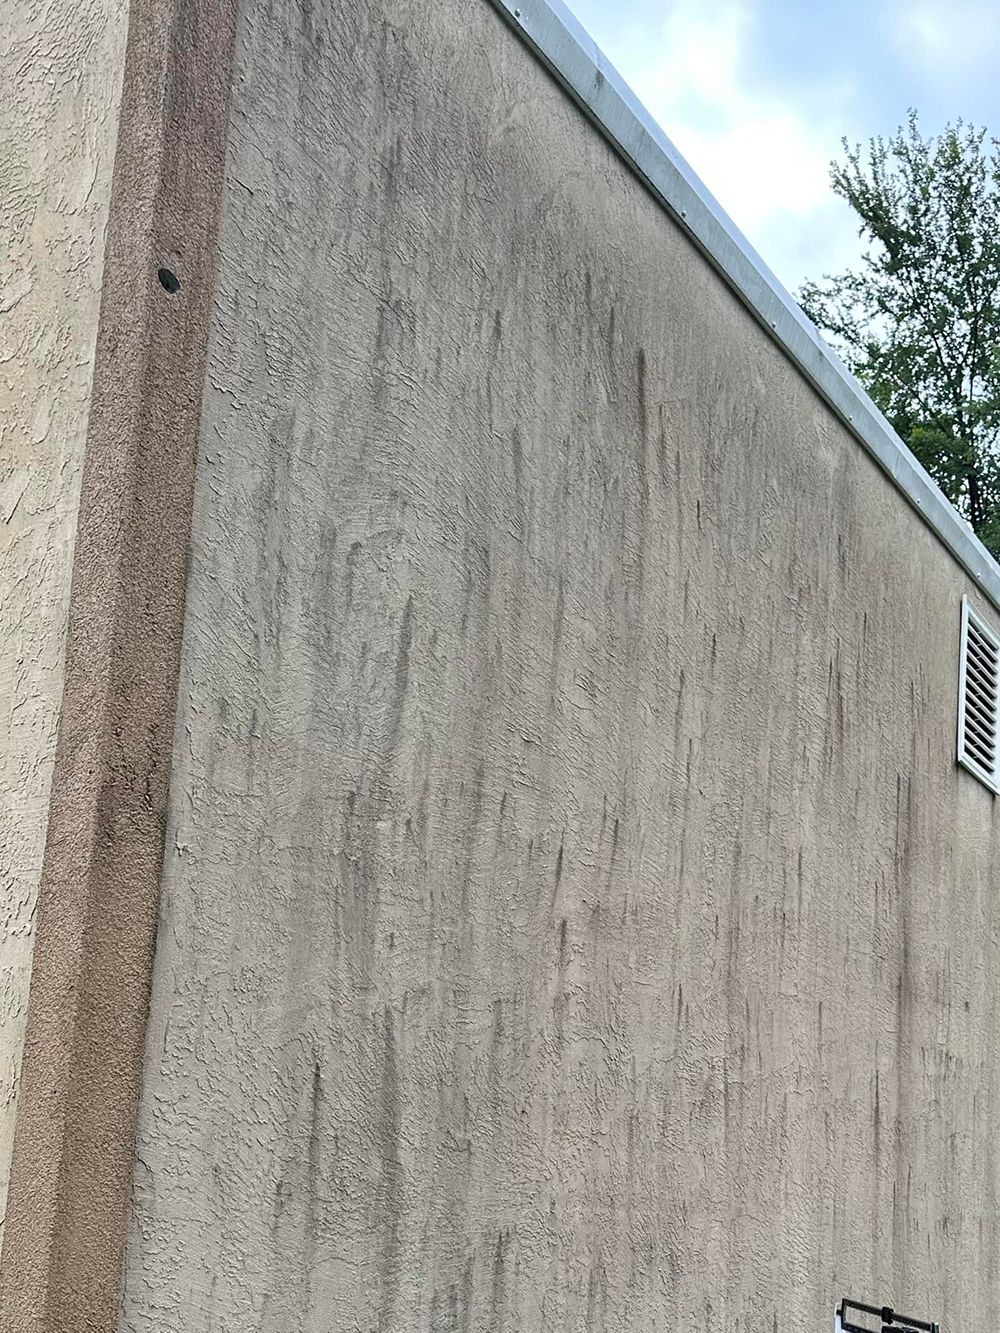 A close up of a dirty wall of a building